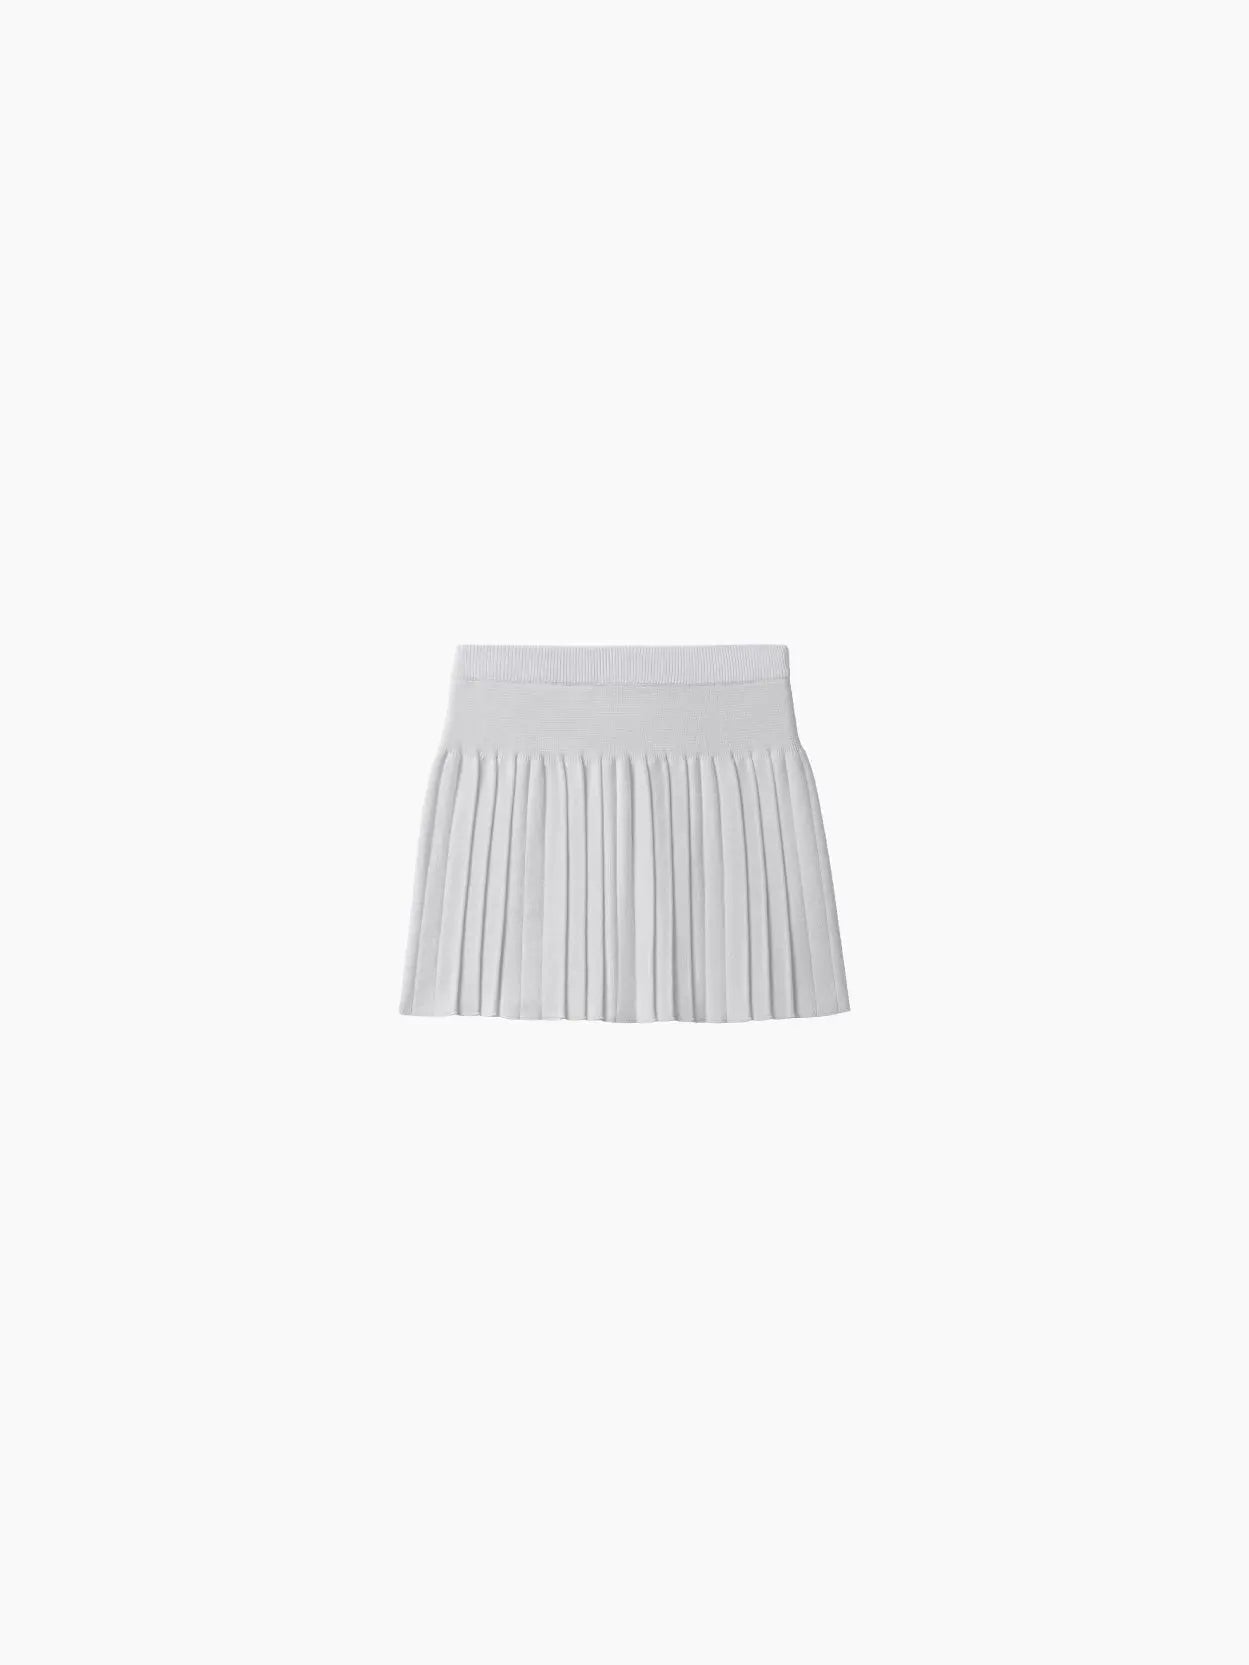 A Cotton Pleated Skirt White by Cordera, showcased against a plain light gray background, features a fitted waistband and multiple sharp pleats creating a structured and stylish look. Find this chic piece at Bassalstore in Barcelona.